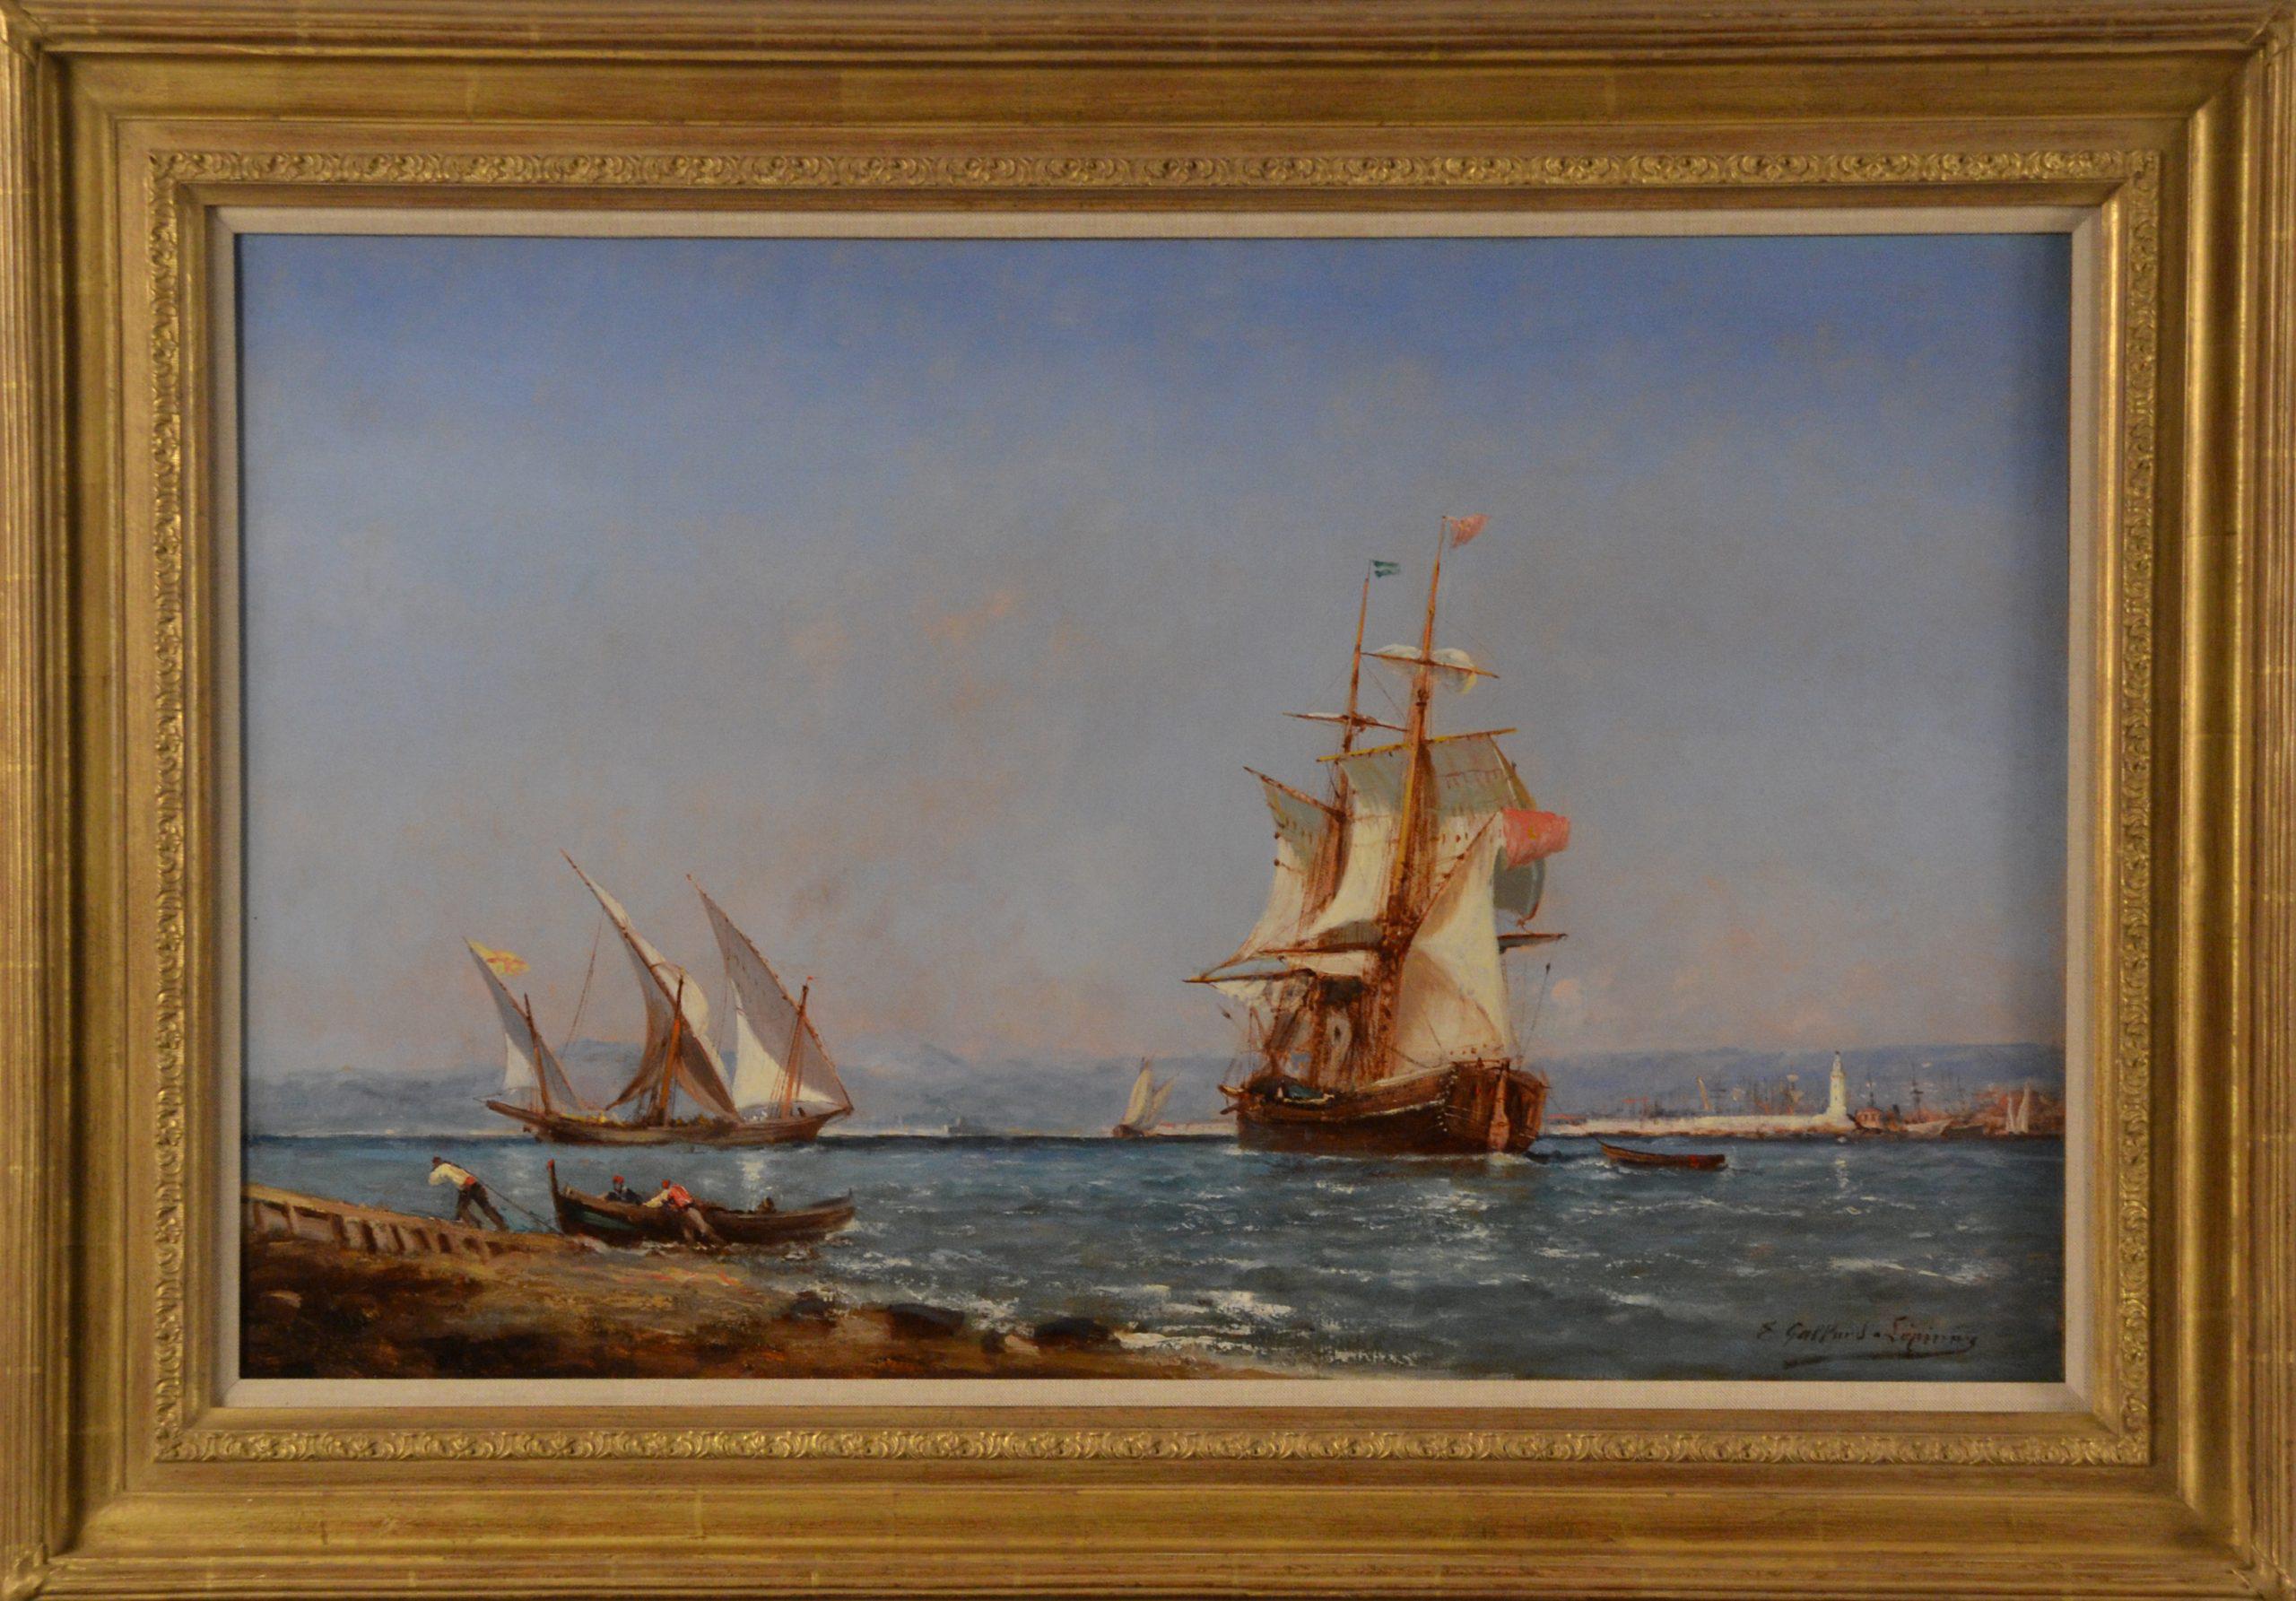 Shipping off Marseille  - Painting by Paul Charles Emmanuel Gallard-Lepinay